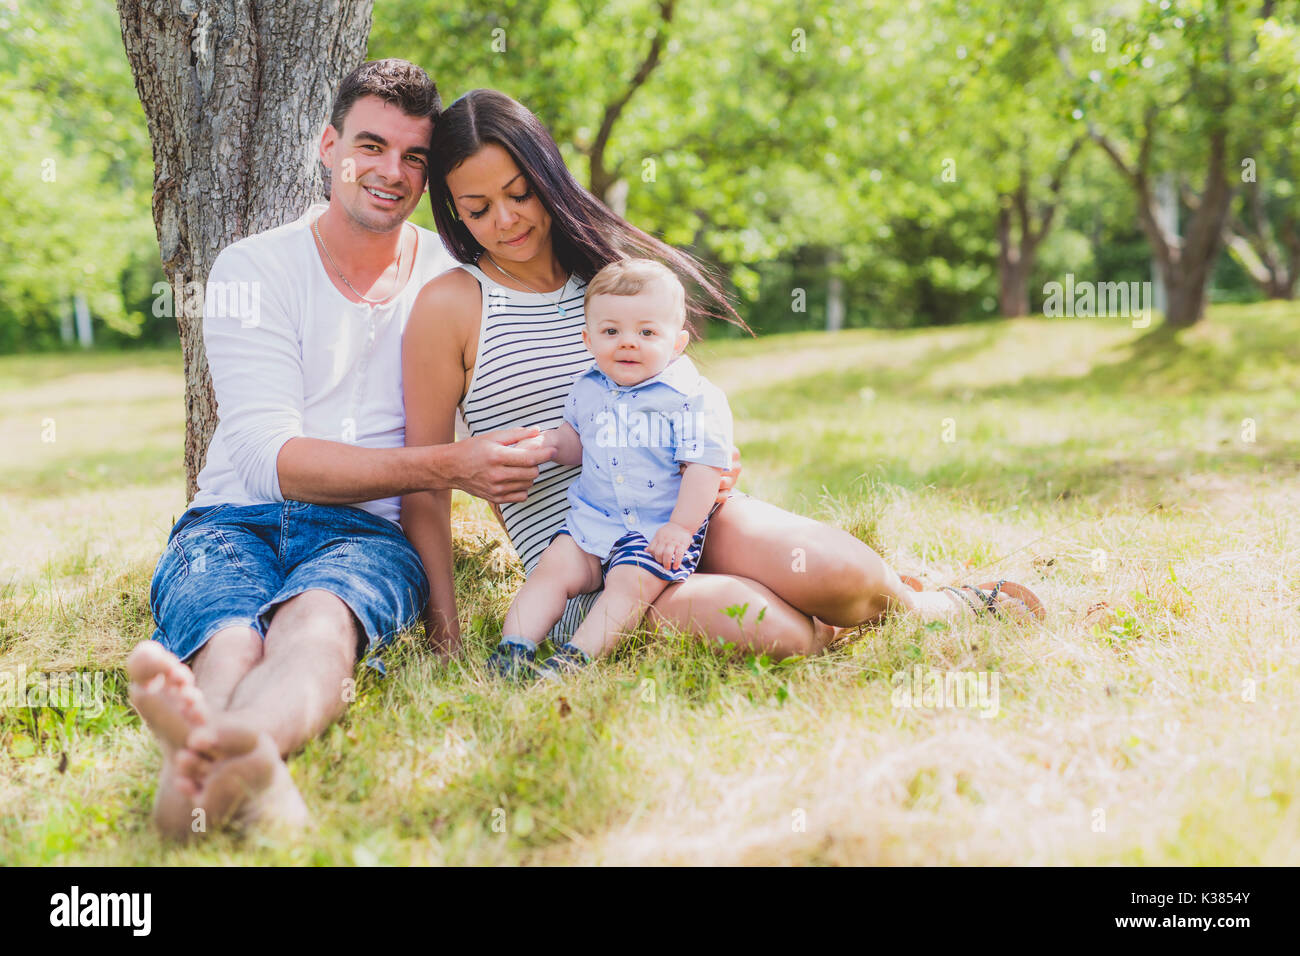 Happy Family Having fun with baby playing In The Park. Stock Photo